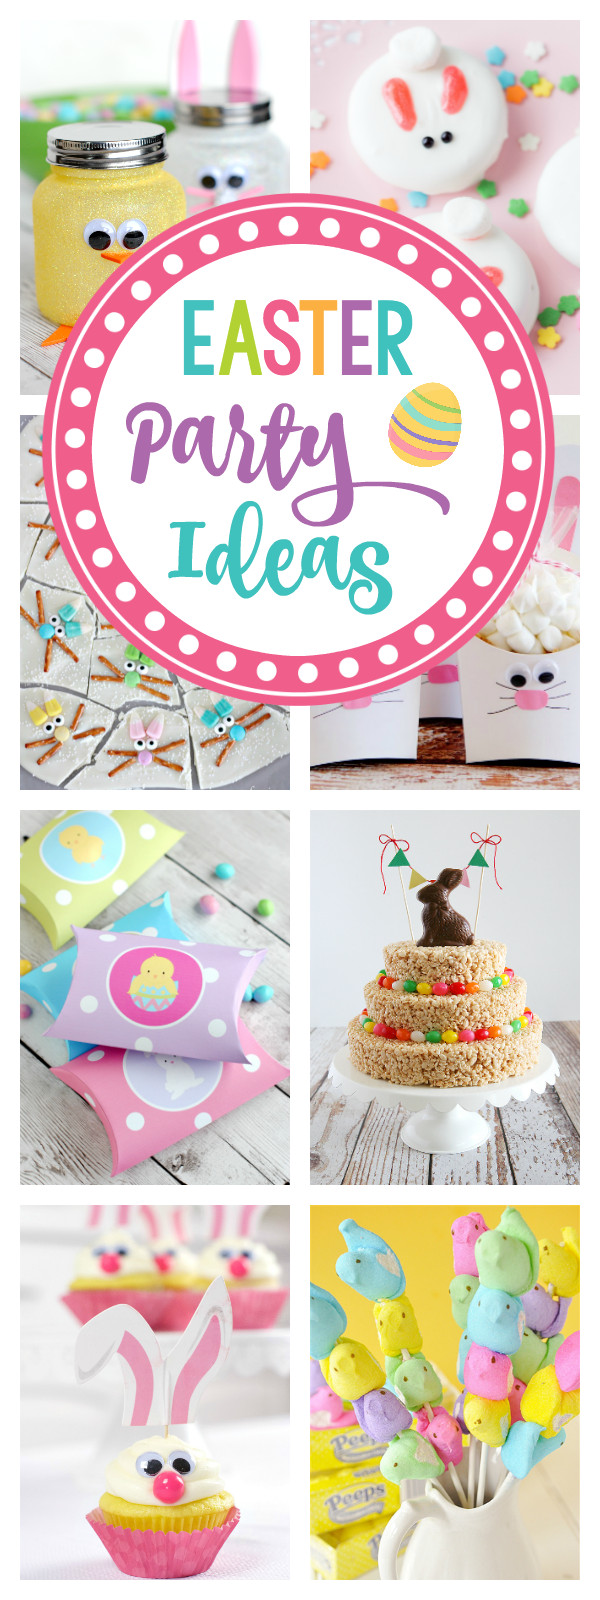 Easter Party Decor Ideas
 25 Fun Easter Party Ideas for Kids – Fun Squared